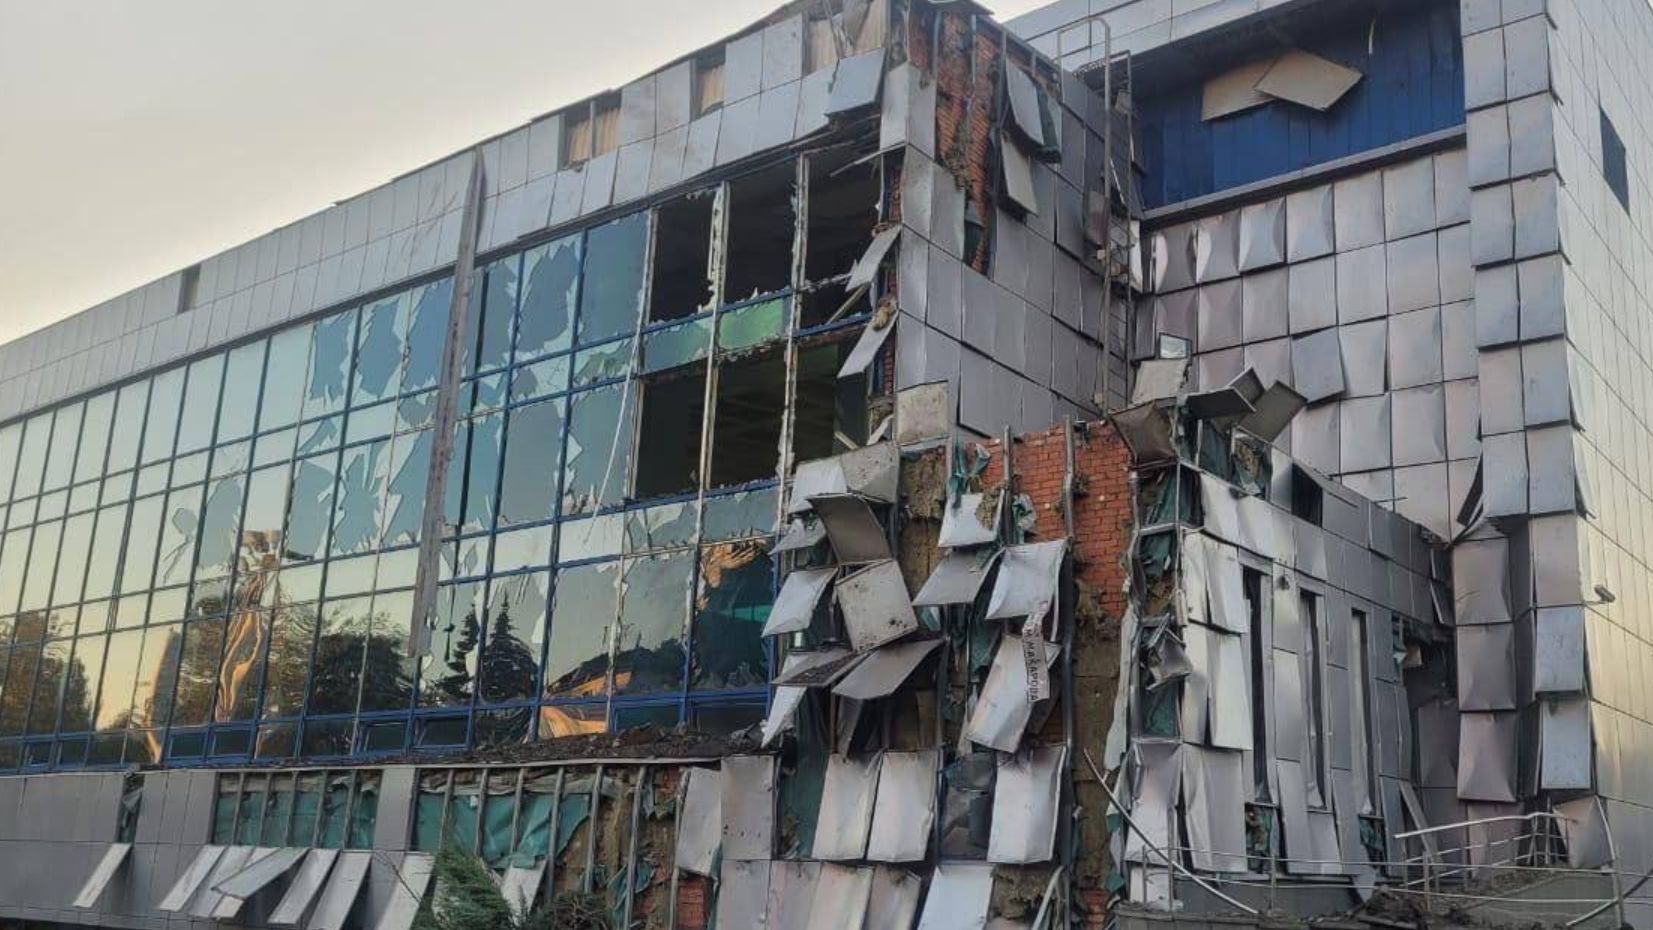 “Twenty more meters and we would have hit the pool.” The Russian Federation demolished a sports complex in Dnipro where swimmers of the Ukrainian national team trained